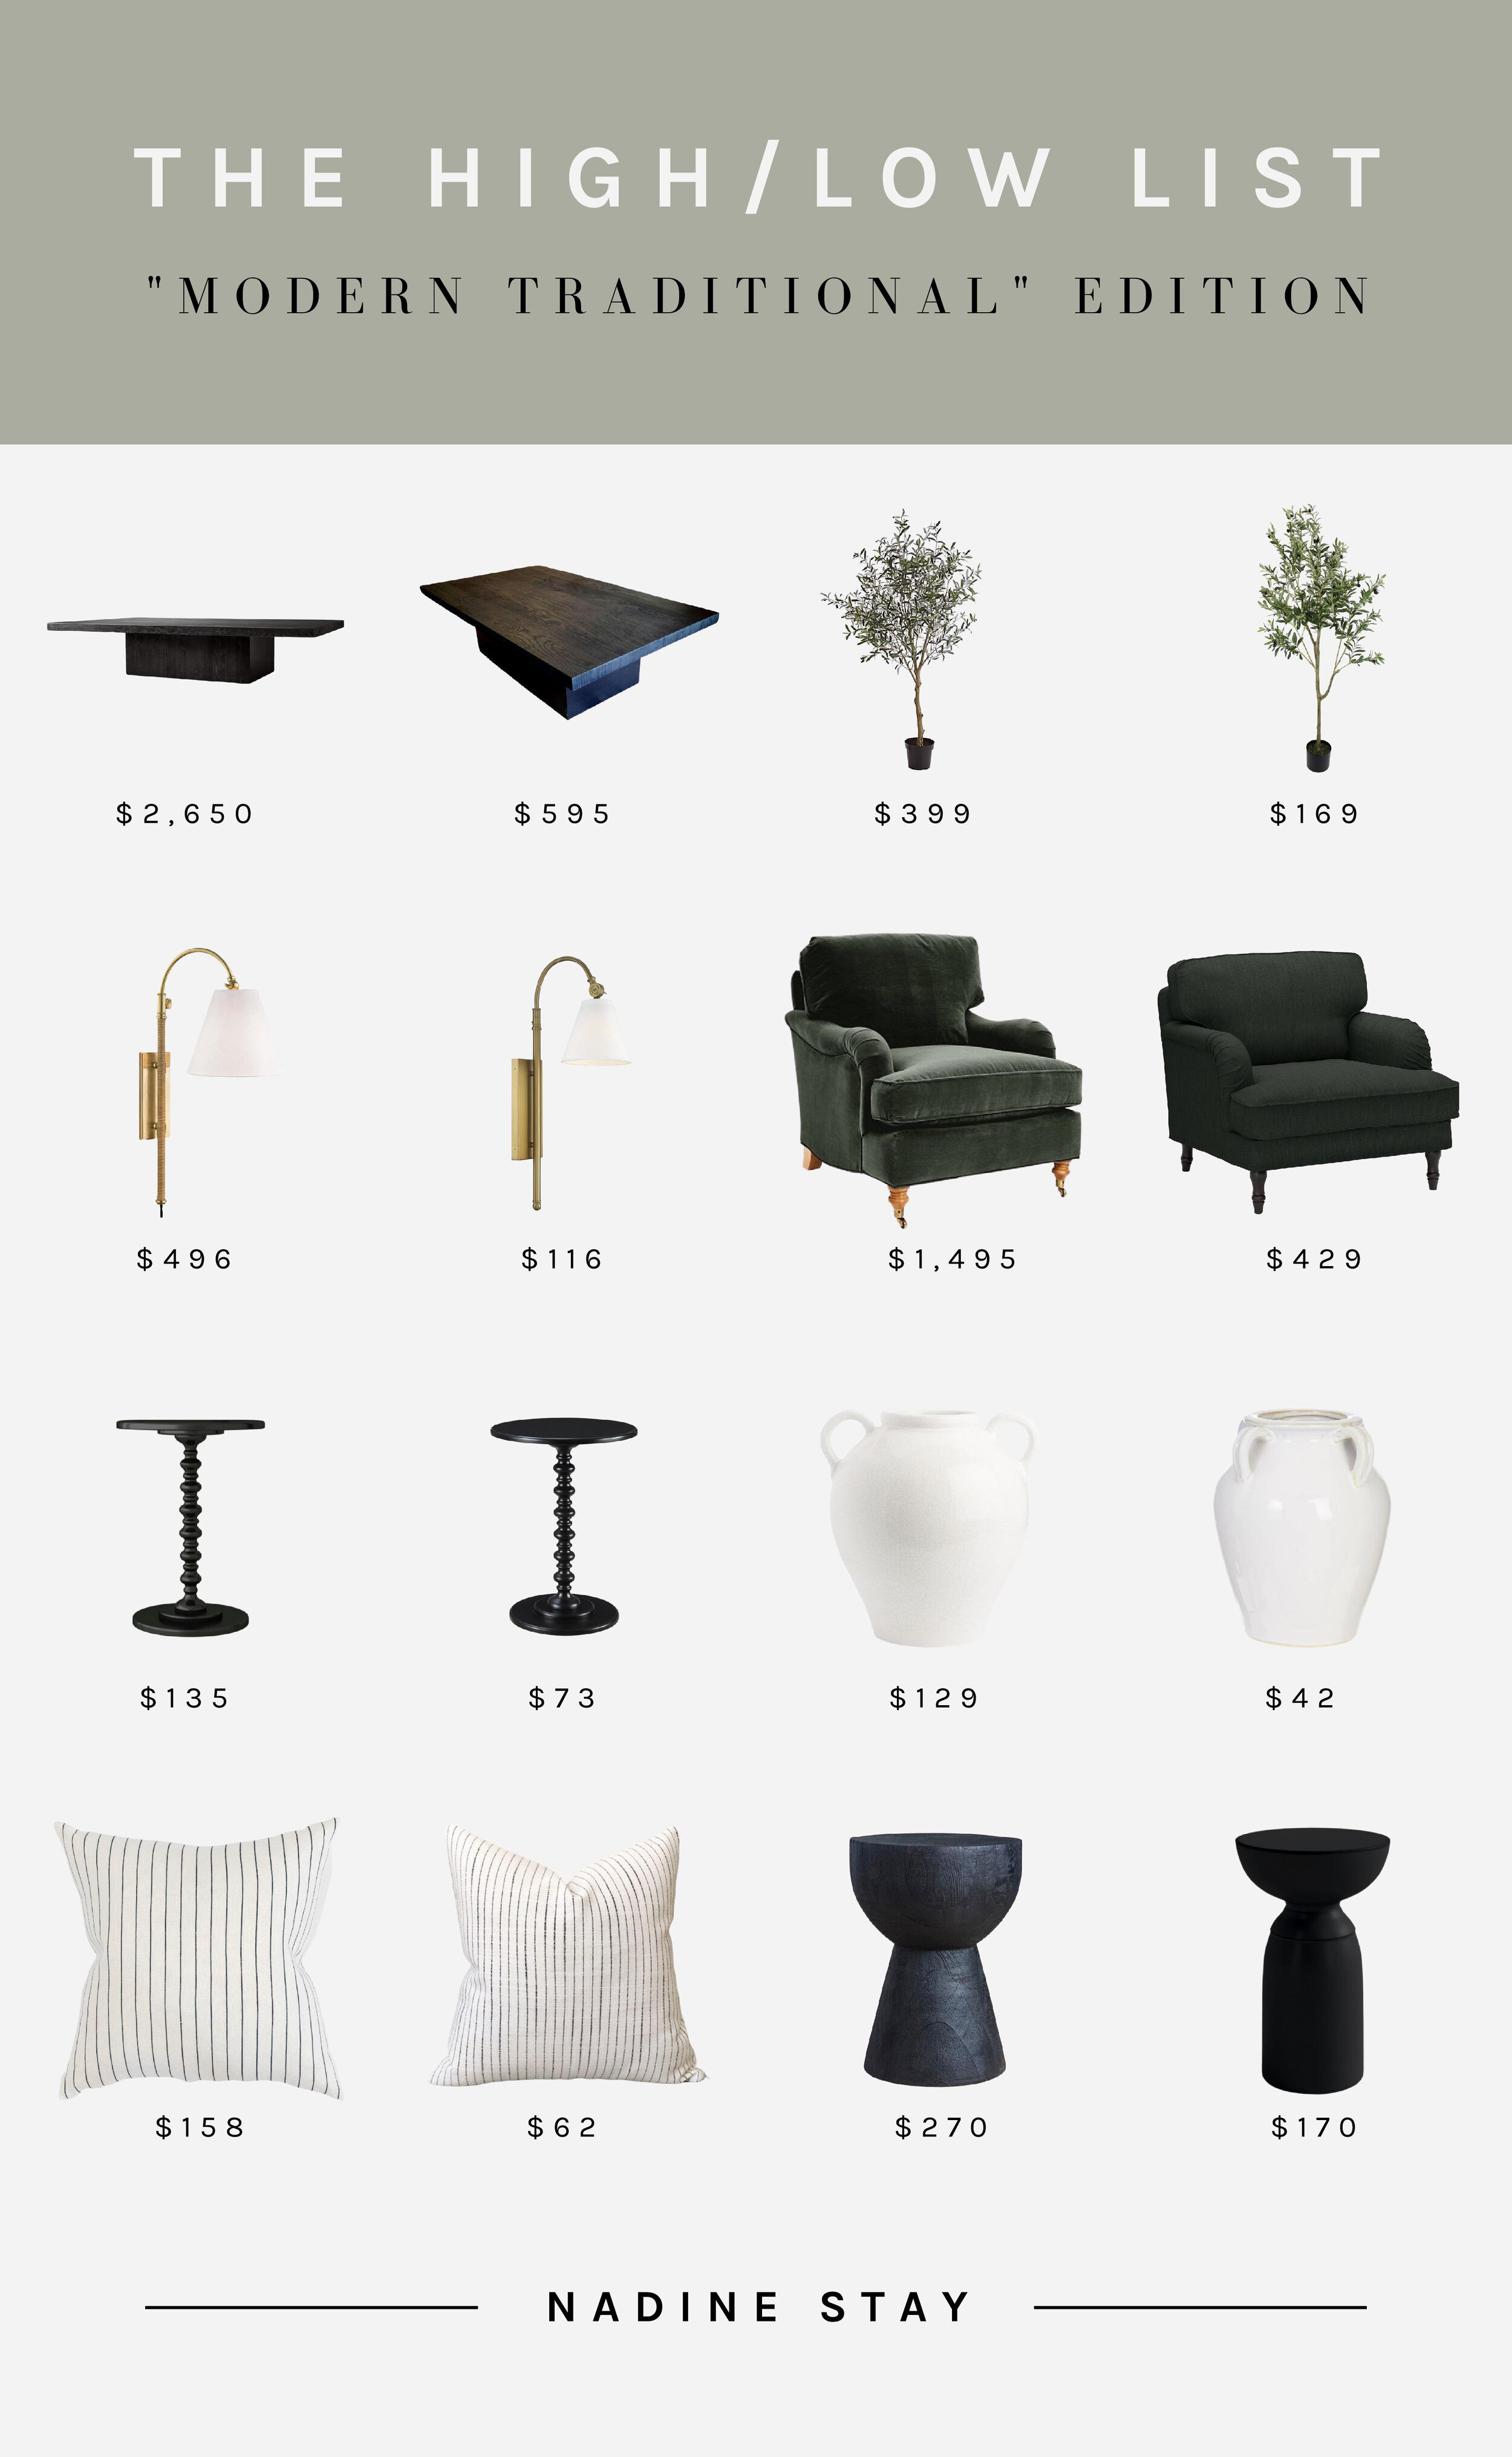 High/Low List: Modern Traditional Furniture & Decor - Plinth coffee table by Restoration Hardware, faux olive tree, brass wall sconce, green velvet accent chair, pedestal side table, artisan vase, floral pillow, and an hourglass table. High end deco…